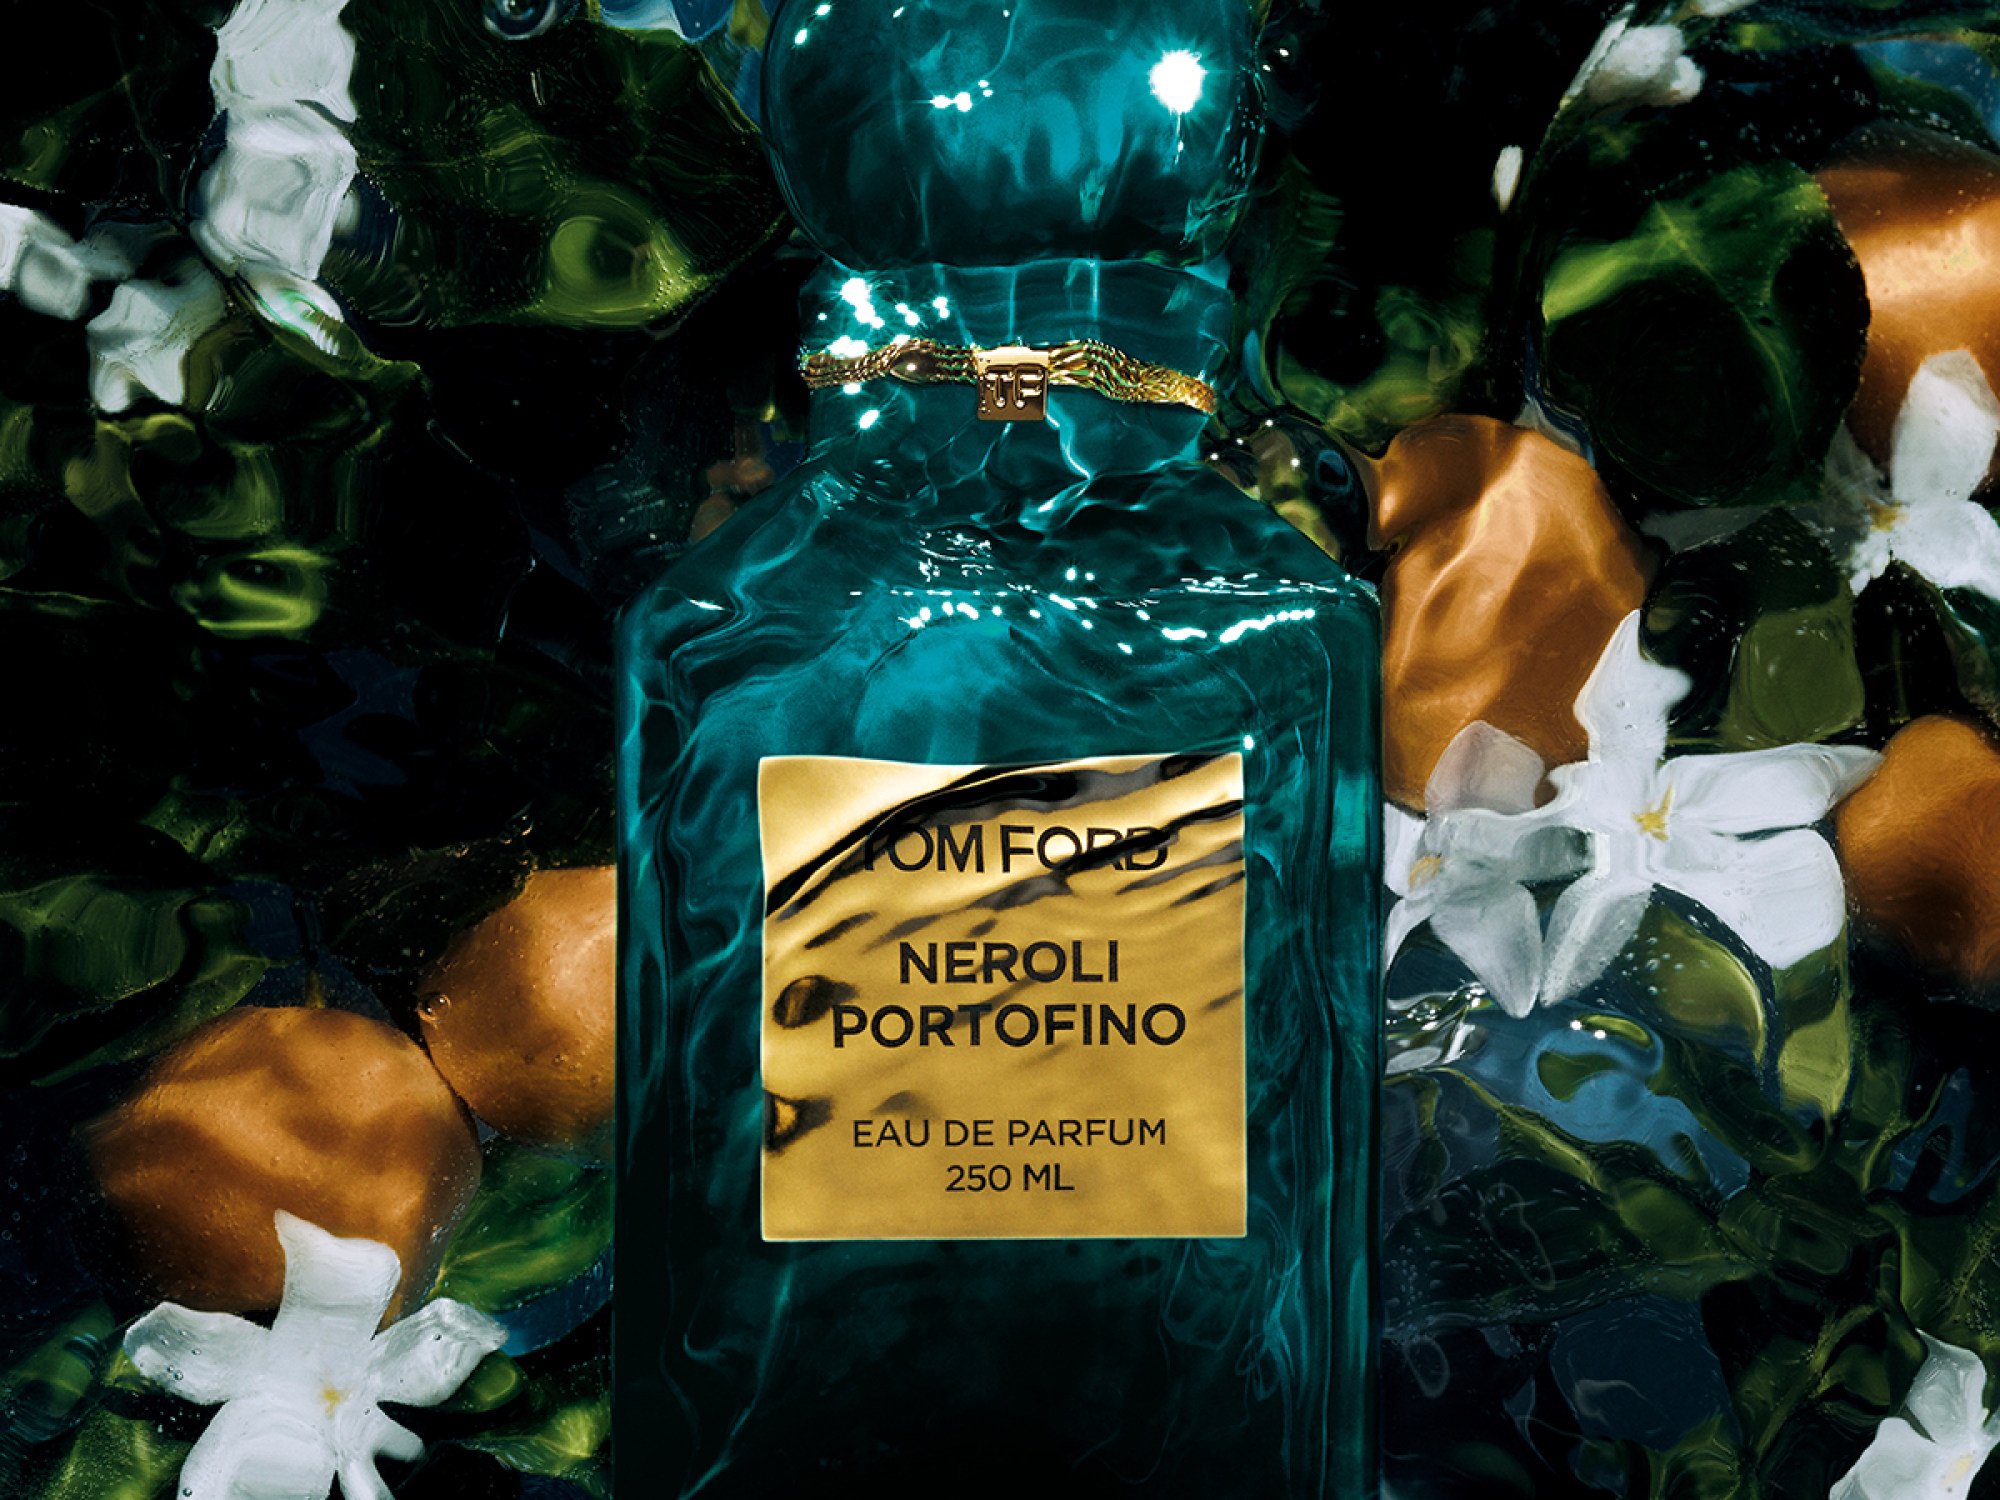 Louis Vuitton's New Pacific Chill Cologne Perfume Is A Detoxifying Summer  Scent - 10 Magazine